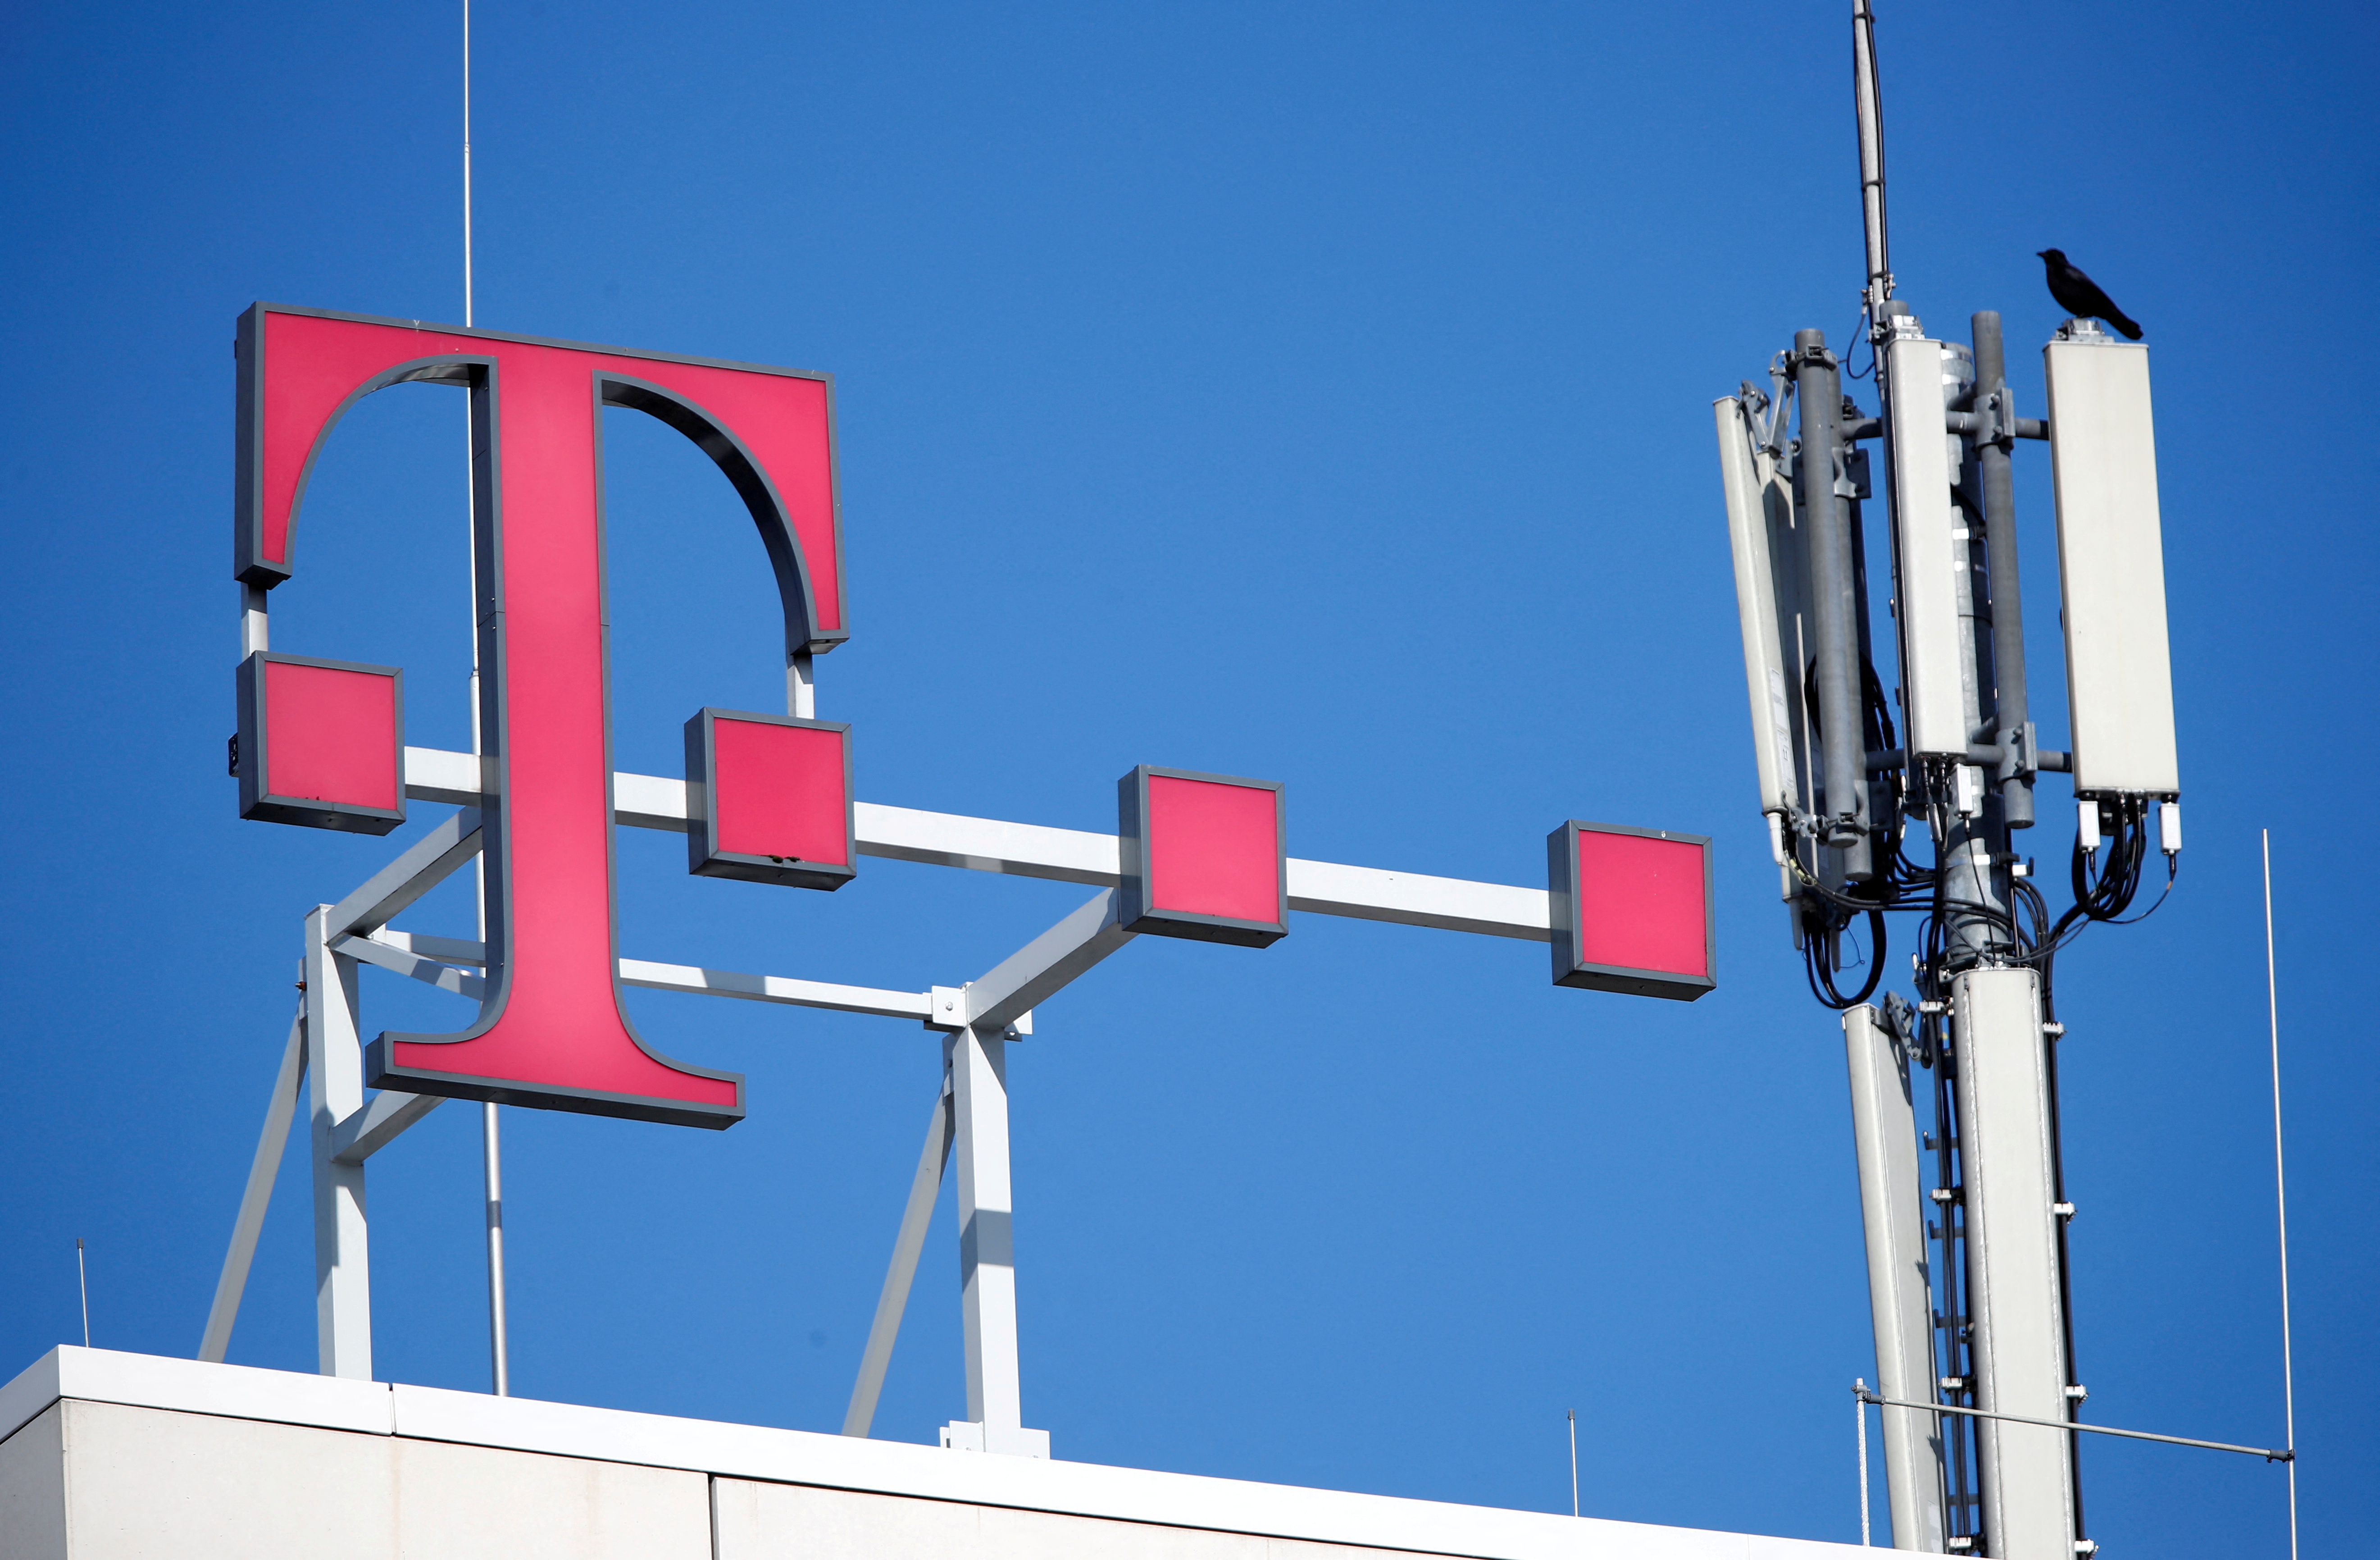 FILE PHOTO: The logo of German telecoms giant Deutsche Telekom and GSM antennas are seen atop the company's headquarters in Bonn